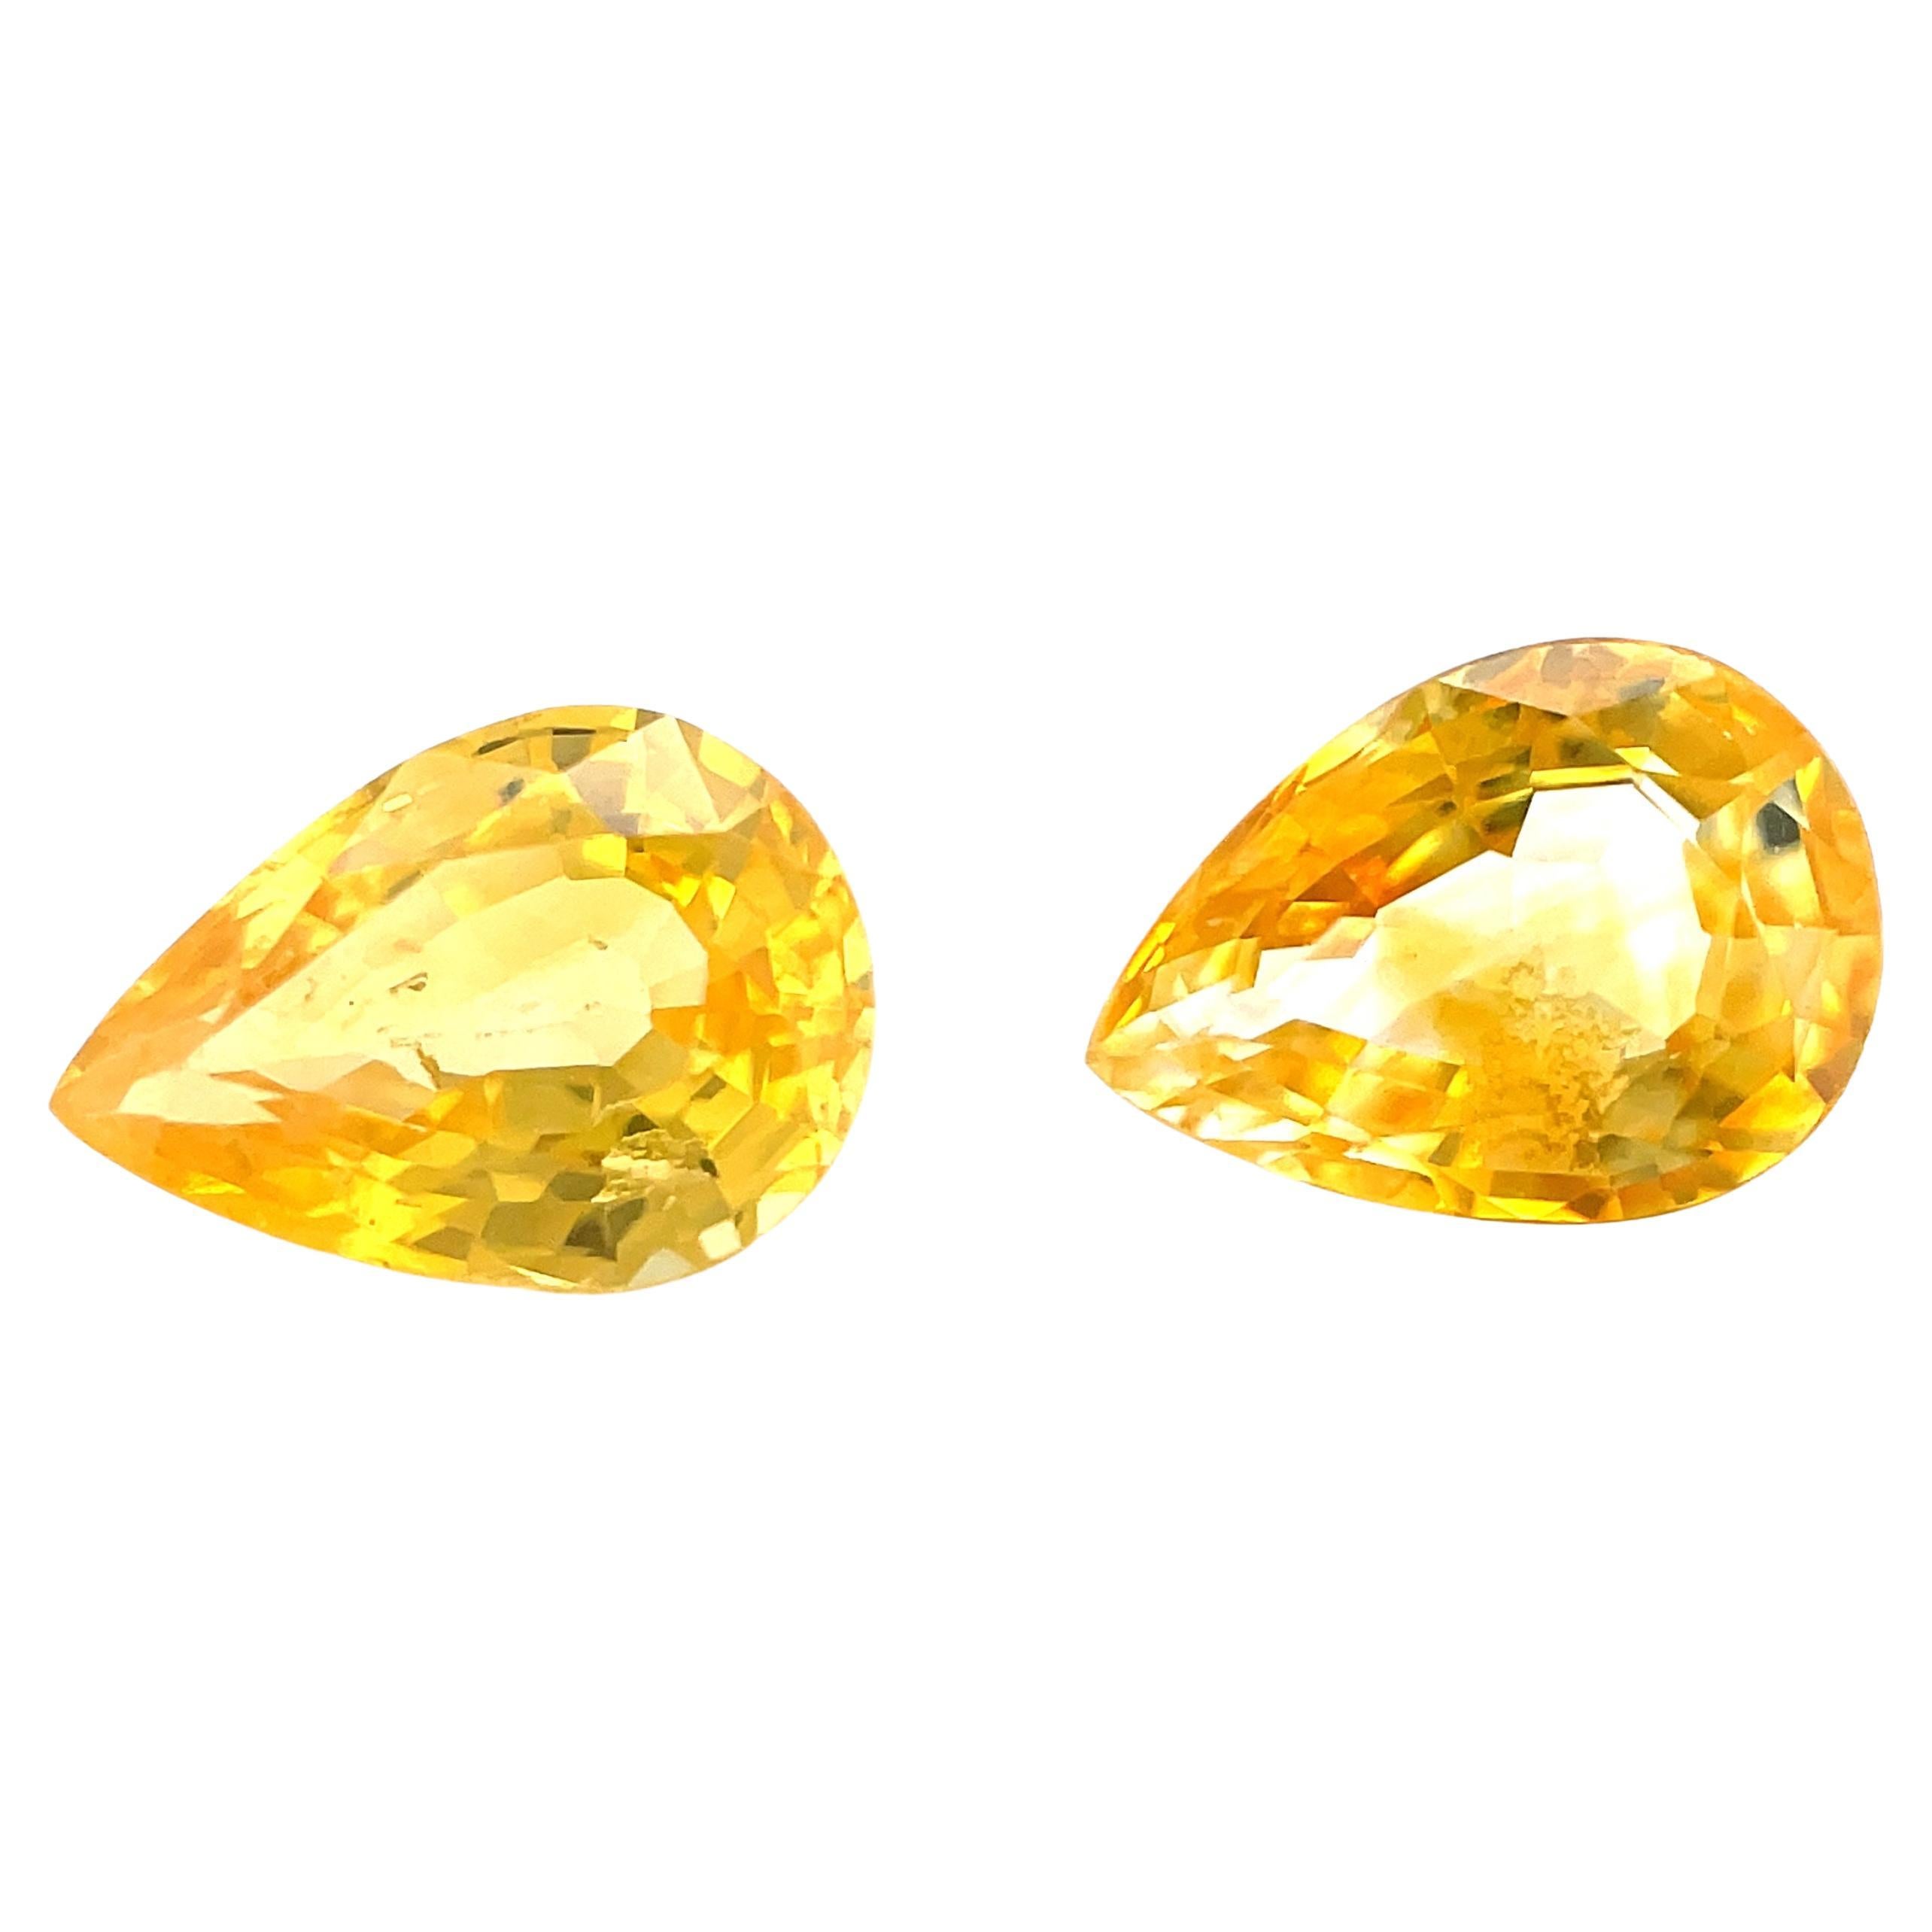 1.70 Carat Total Pair of Pear Shaped Yellow Sapphires for Earrings, Loose Gems